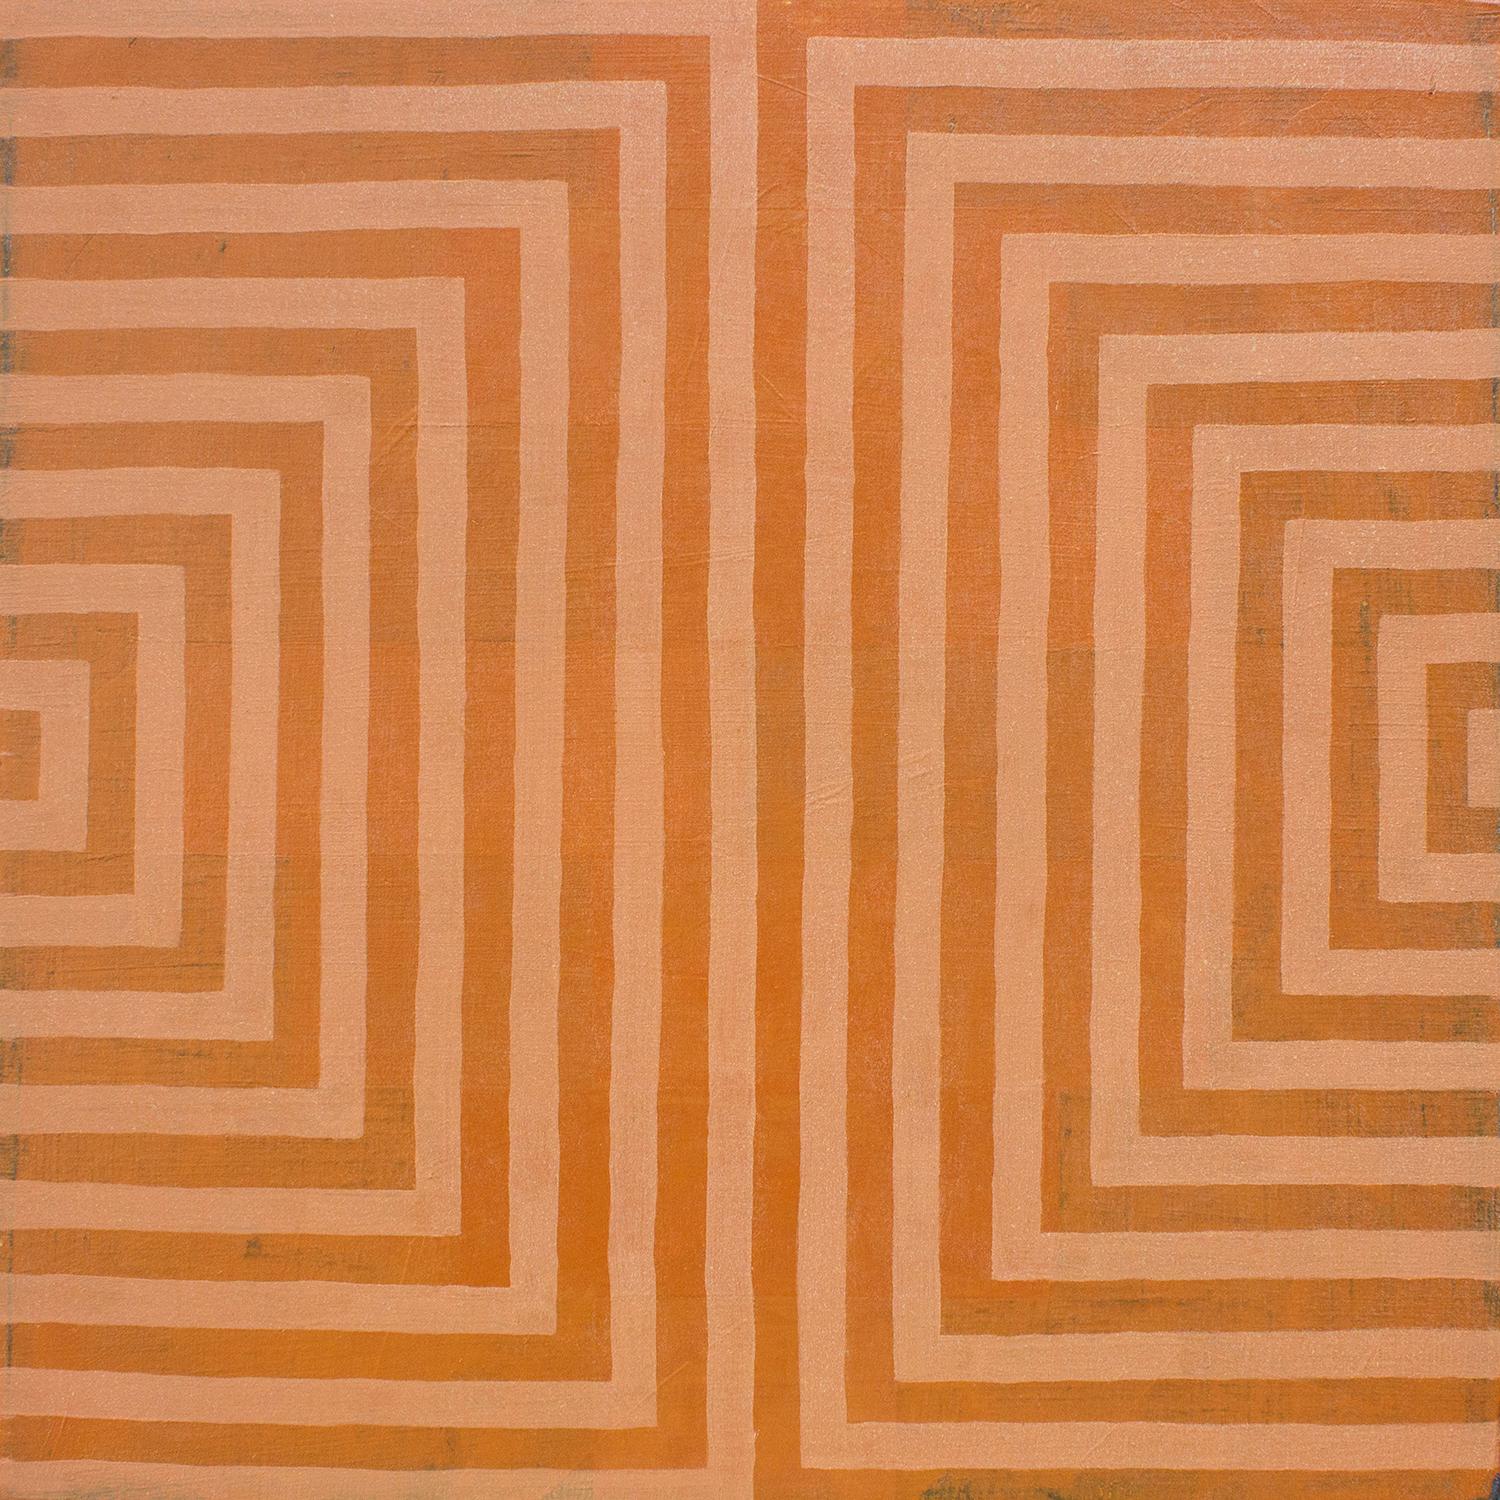 "Balance" is a geometric abstract painting featuring hues of pink and terracotta. 
Amanda Brazer creates handmade oil paints from locally harvested earth pigments. She is inspired by the work of Agnes Martin and Anni Albers.

Chattanooga-based